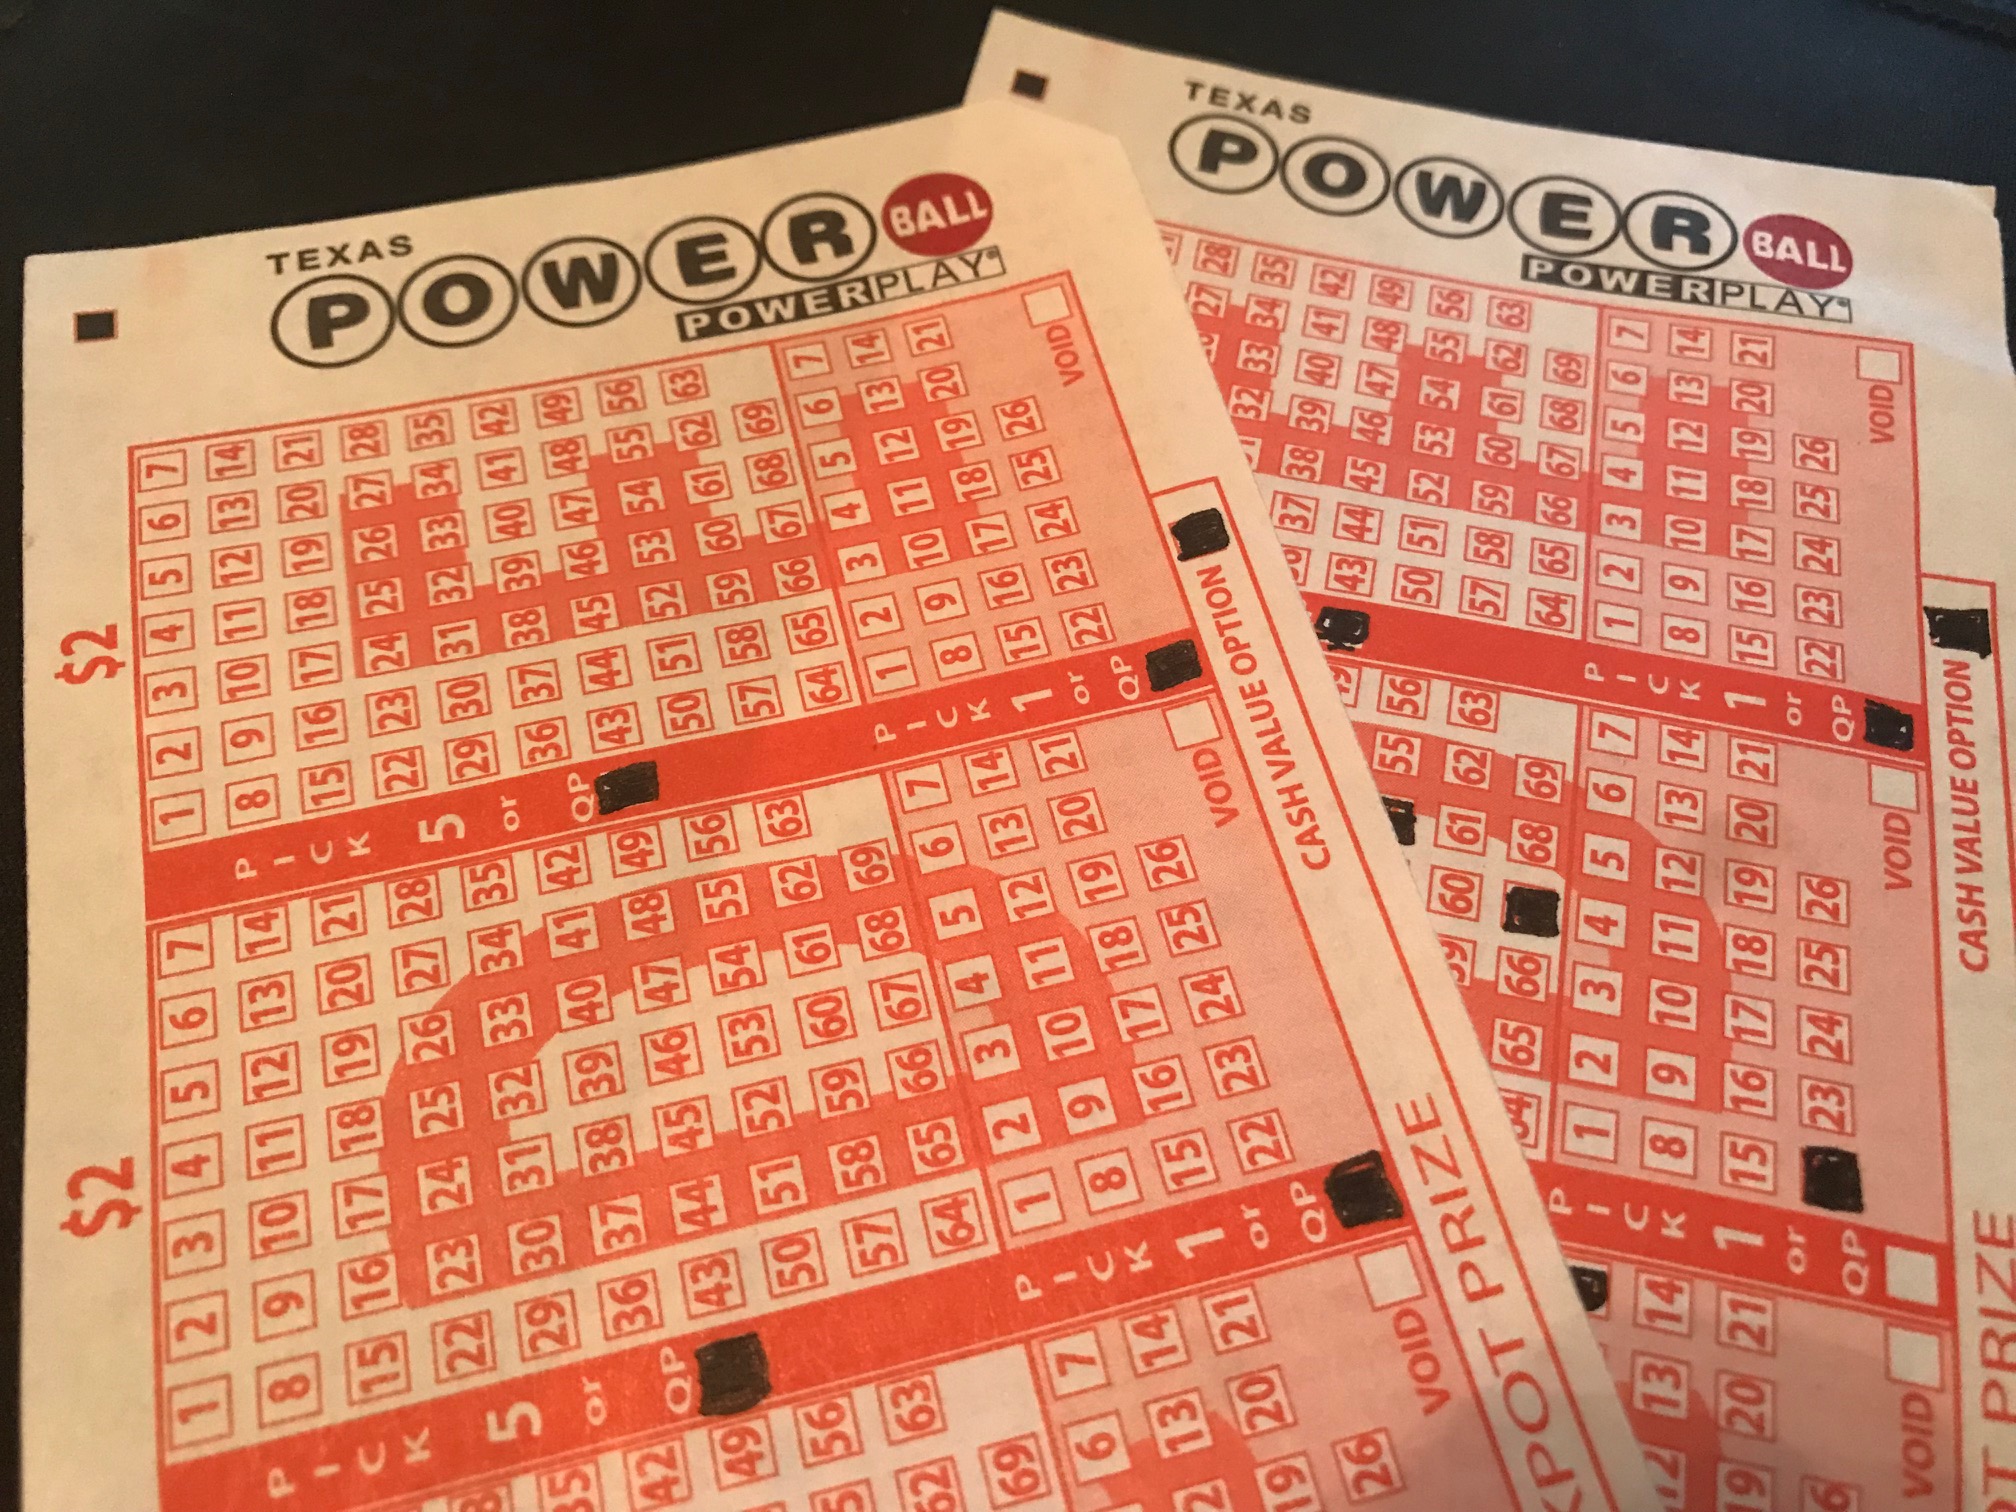 Powerball strategy to keep playing with winnings